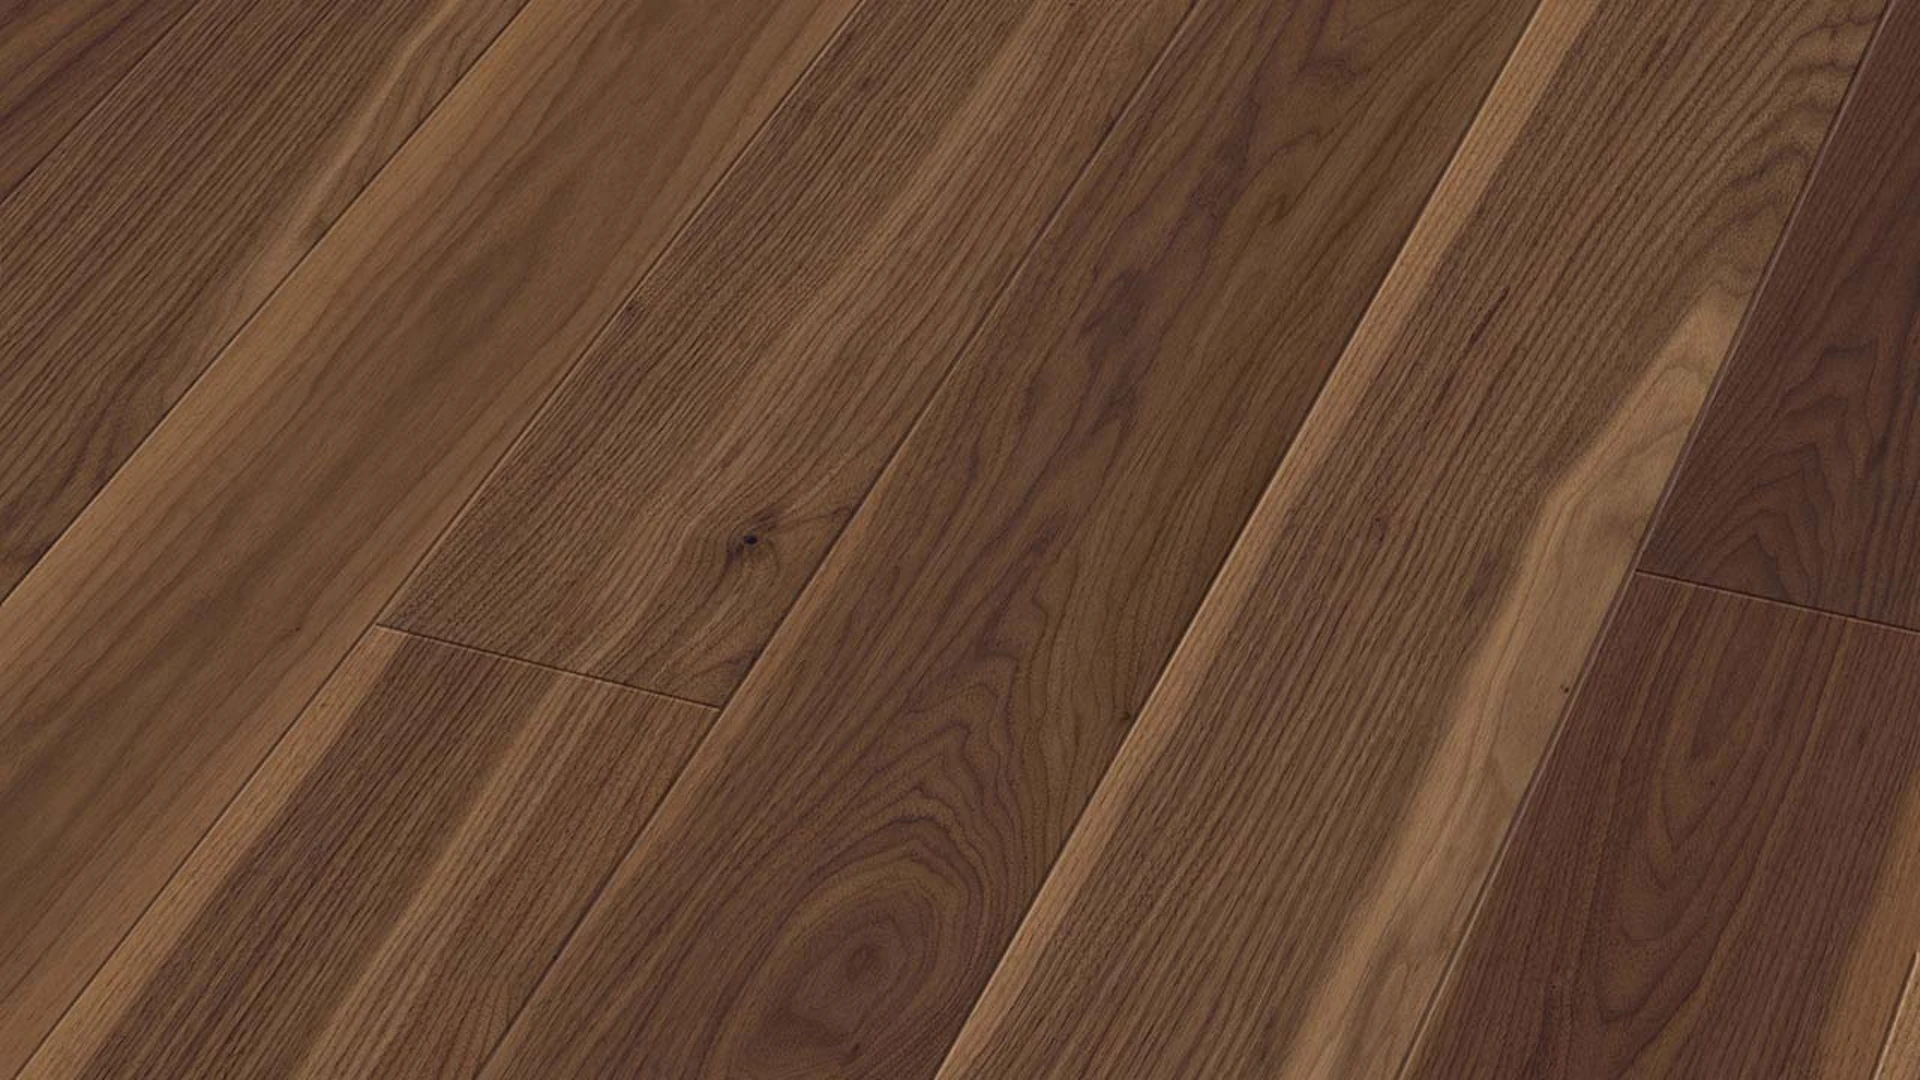 MEISTER Parquet Flooring - Longlife PD 400 American Walnut lively (500006-2200180-09009)